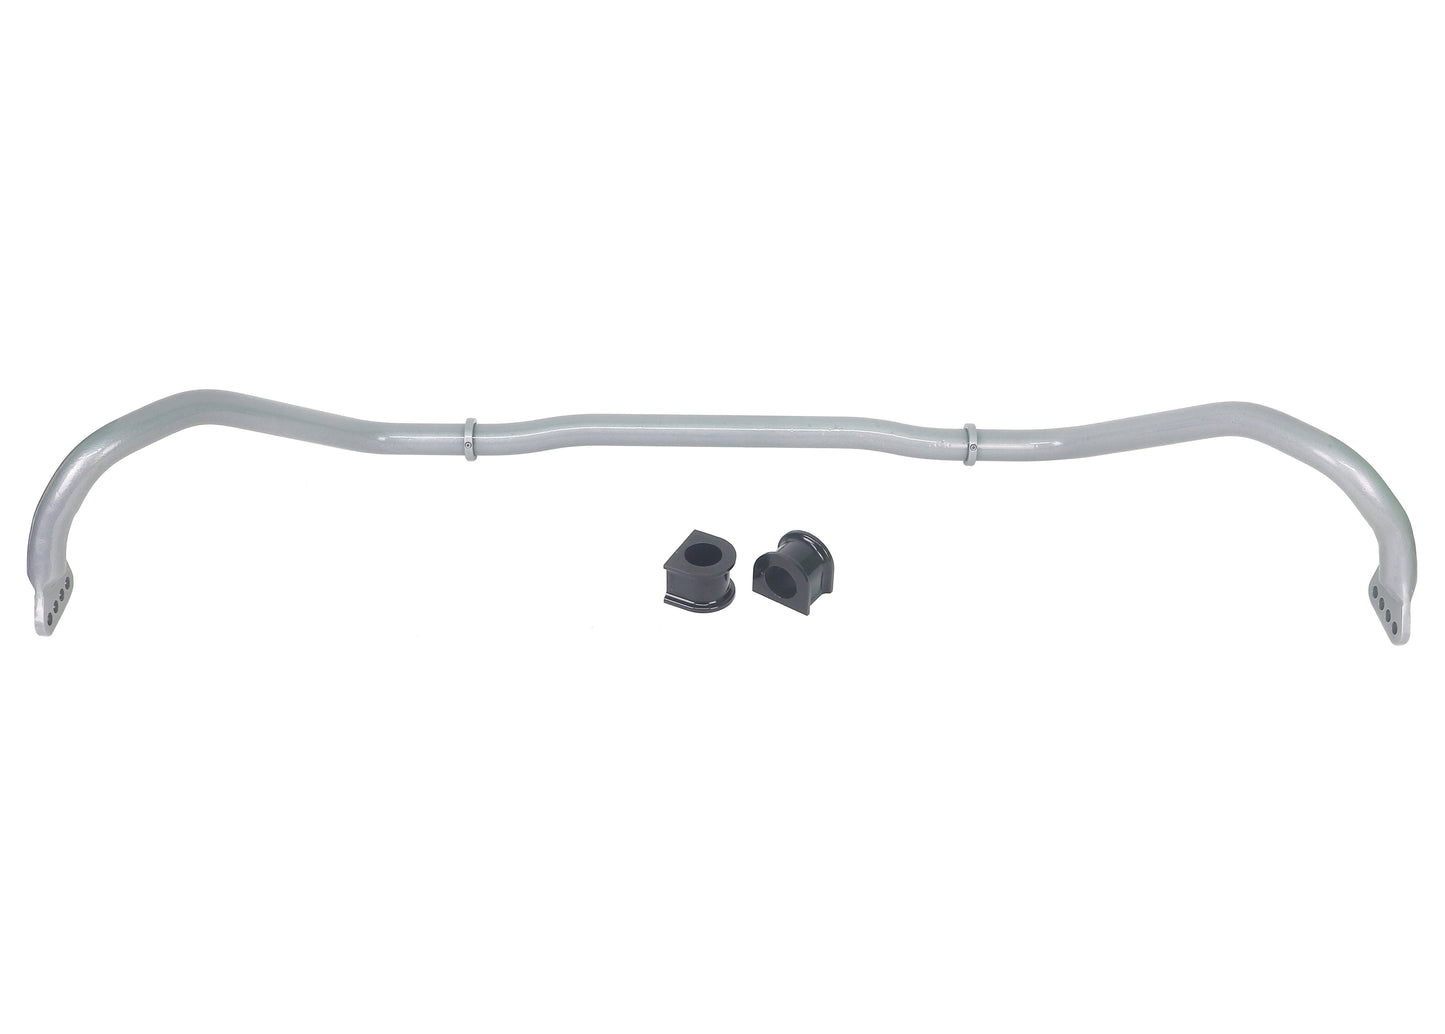 Whiteline Front Anti Roll Bar 30mm 4-Point Adjustable for Vauxhall Maloo (08-13)